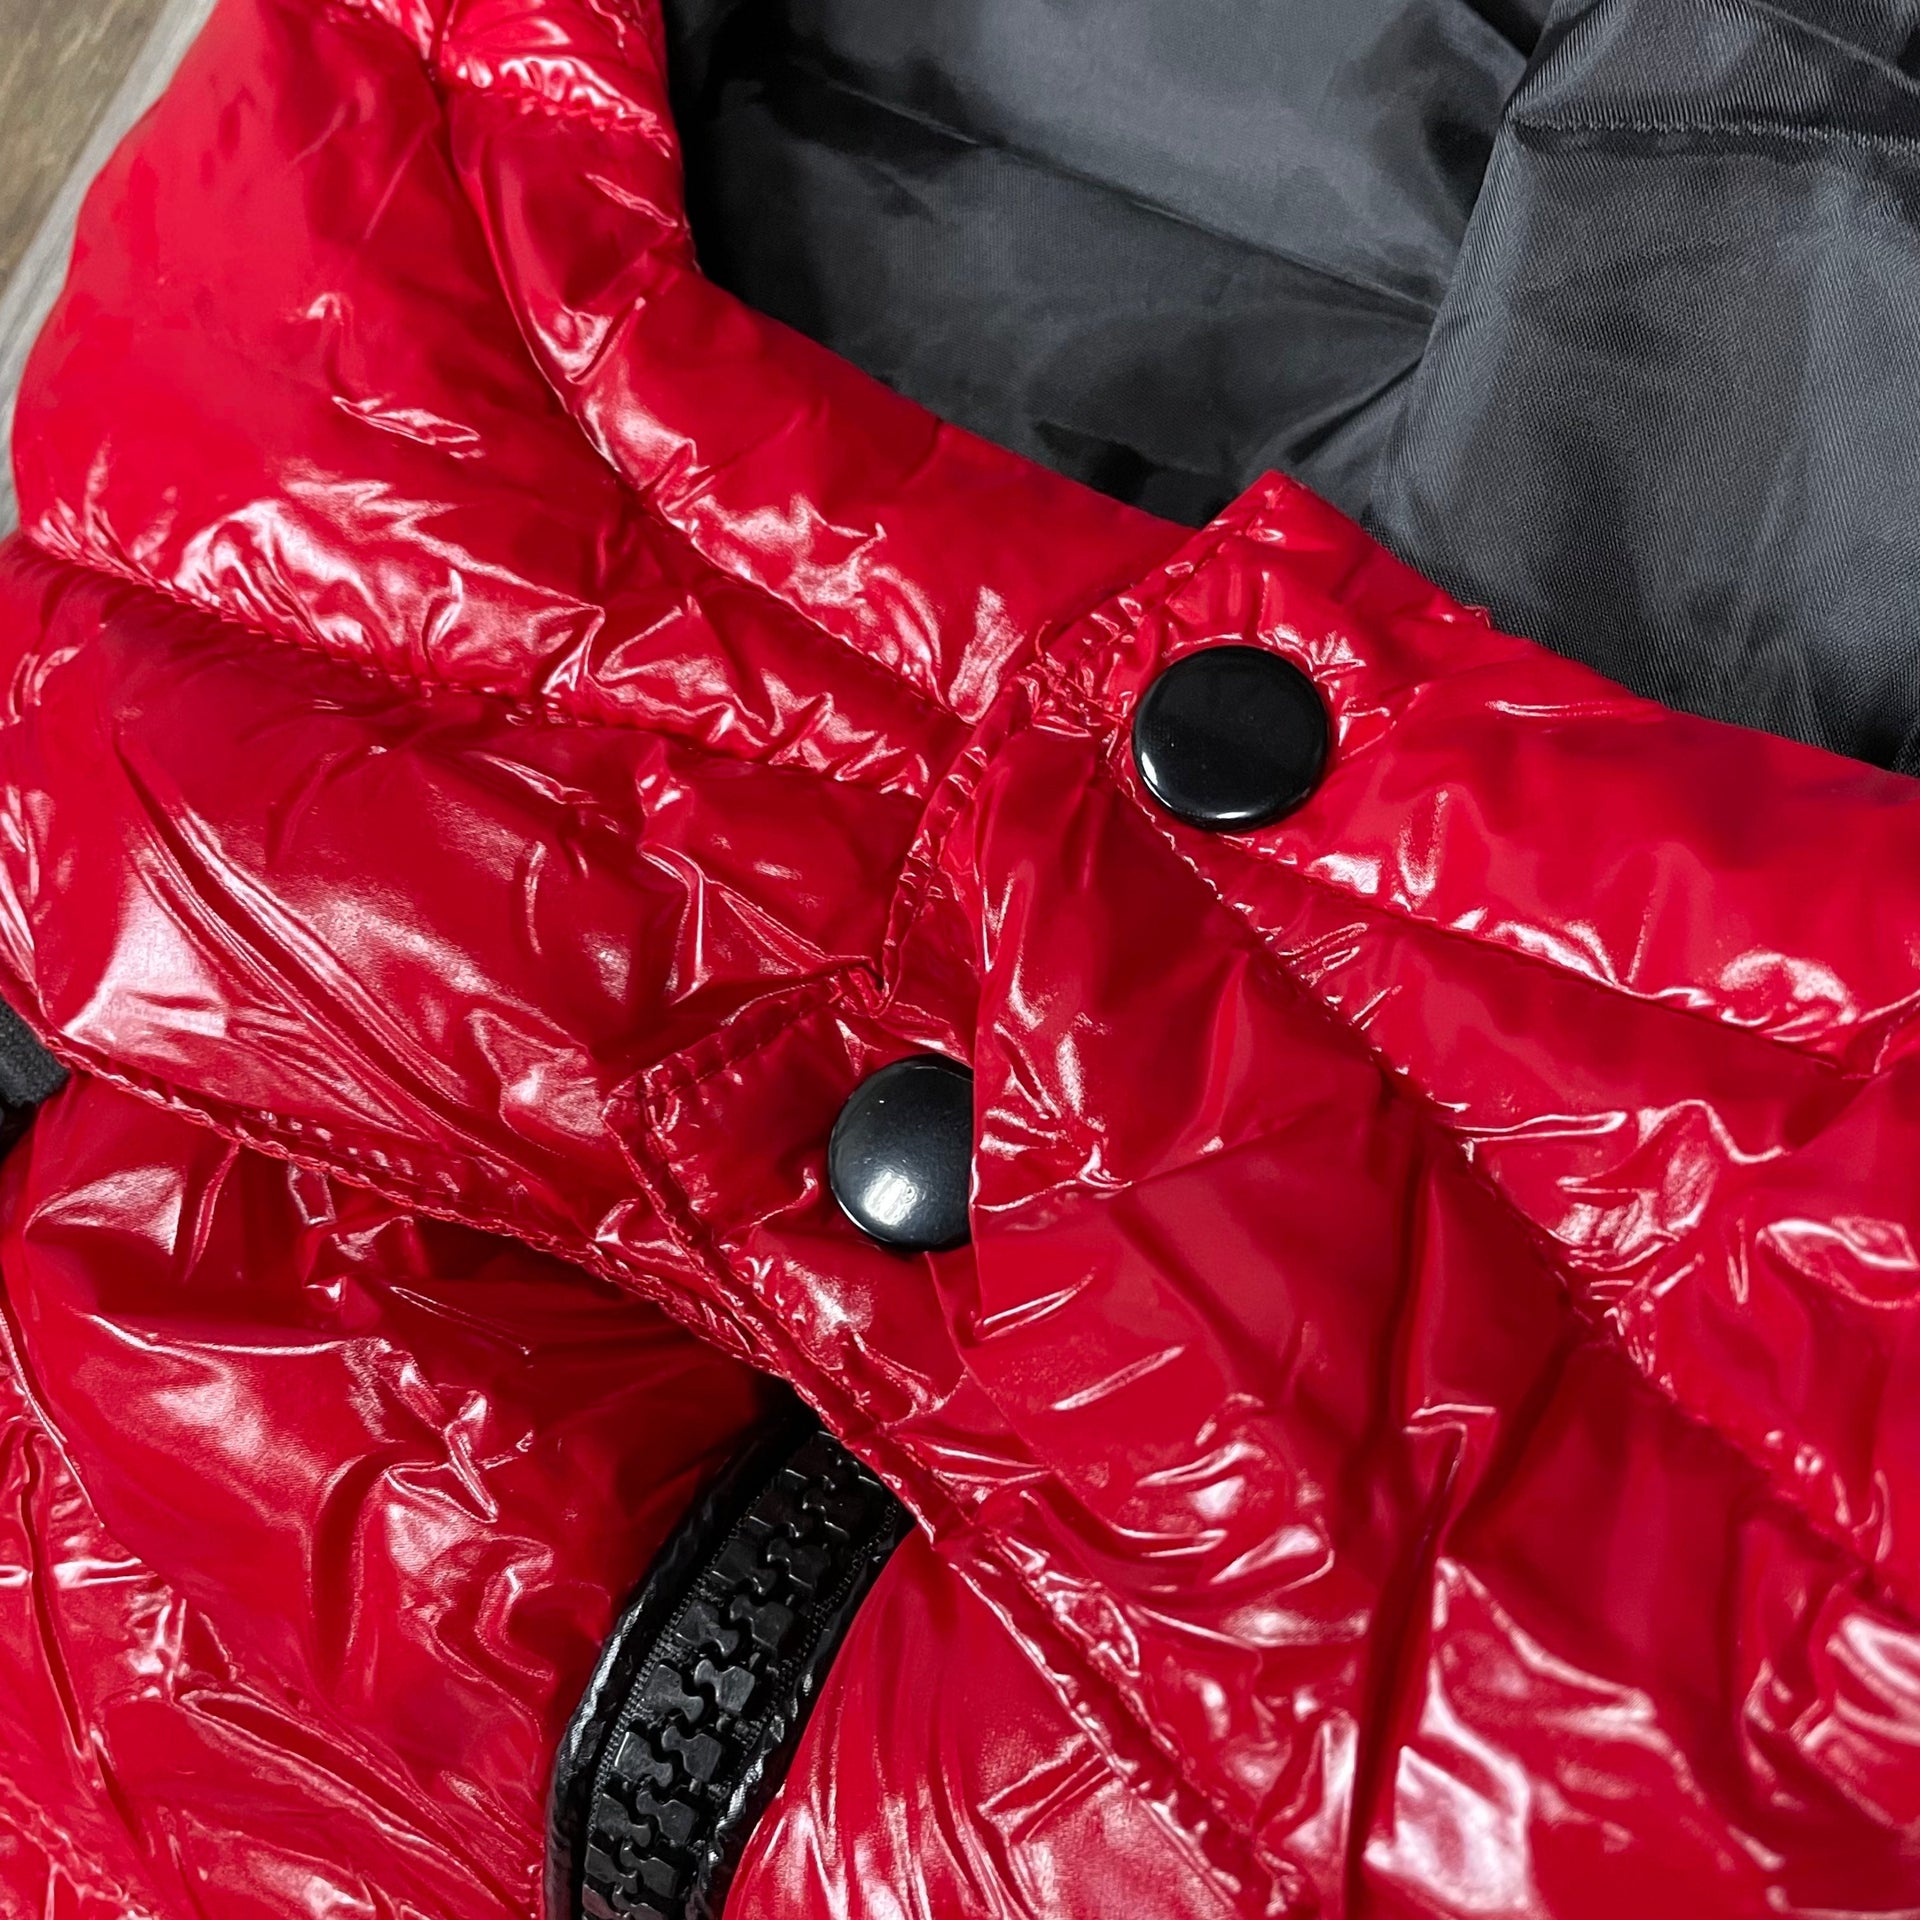 Buttons on the front of the Glossy Metallic Shiny Men’s Puffer Jacket with Removable Hood | Red/Black